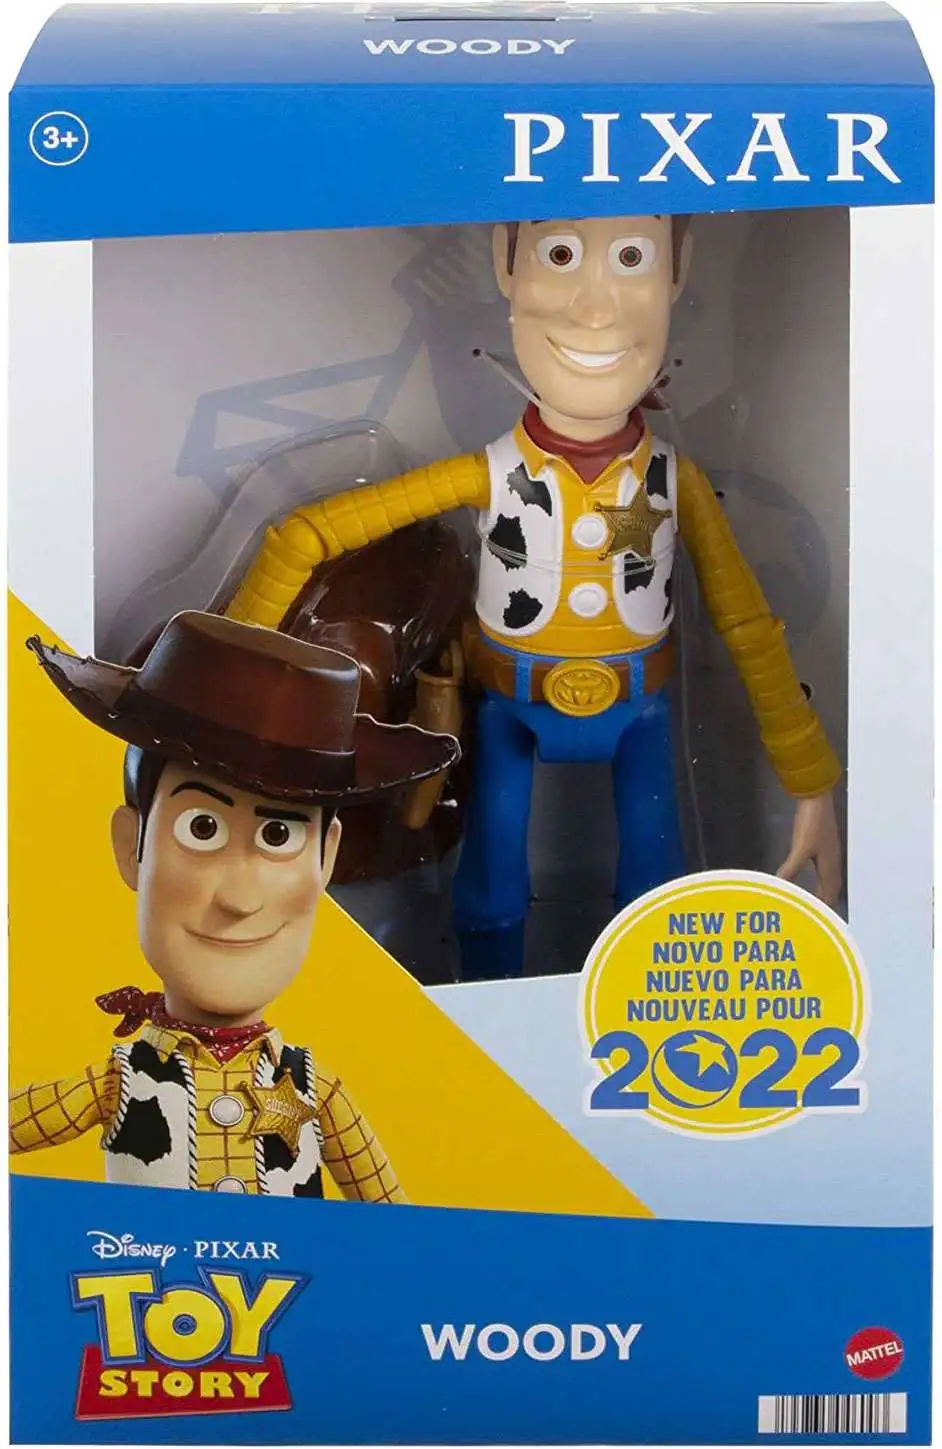 2 Lead and Real Wood Buzz Lightyear Disney Toy Story 4 Wood Pencil 2 Packs of 12 Pencils Rex Sheriff Woody Little Bo Peep 